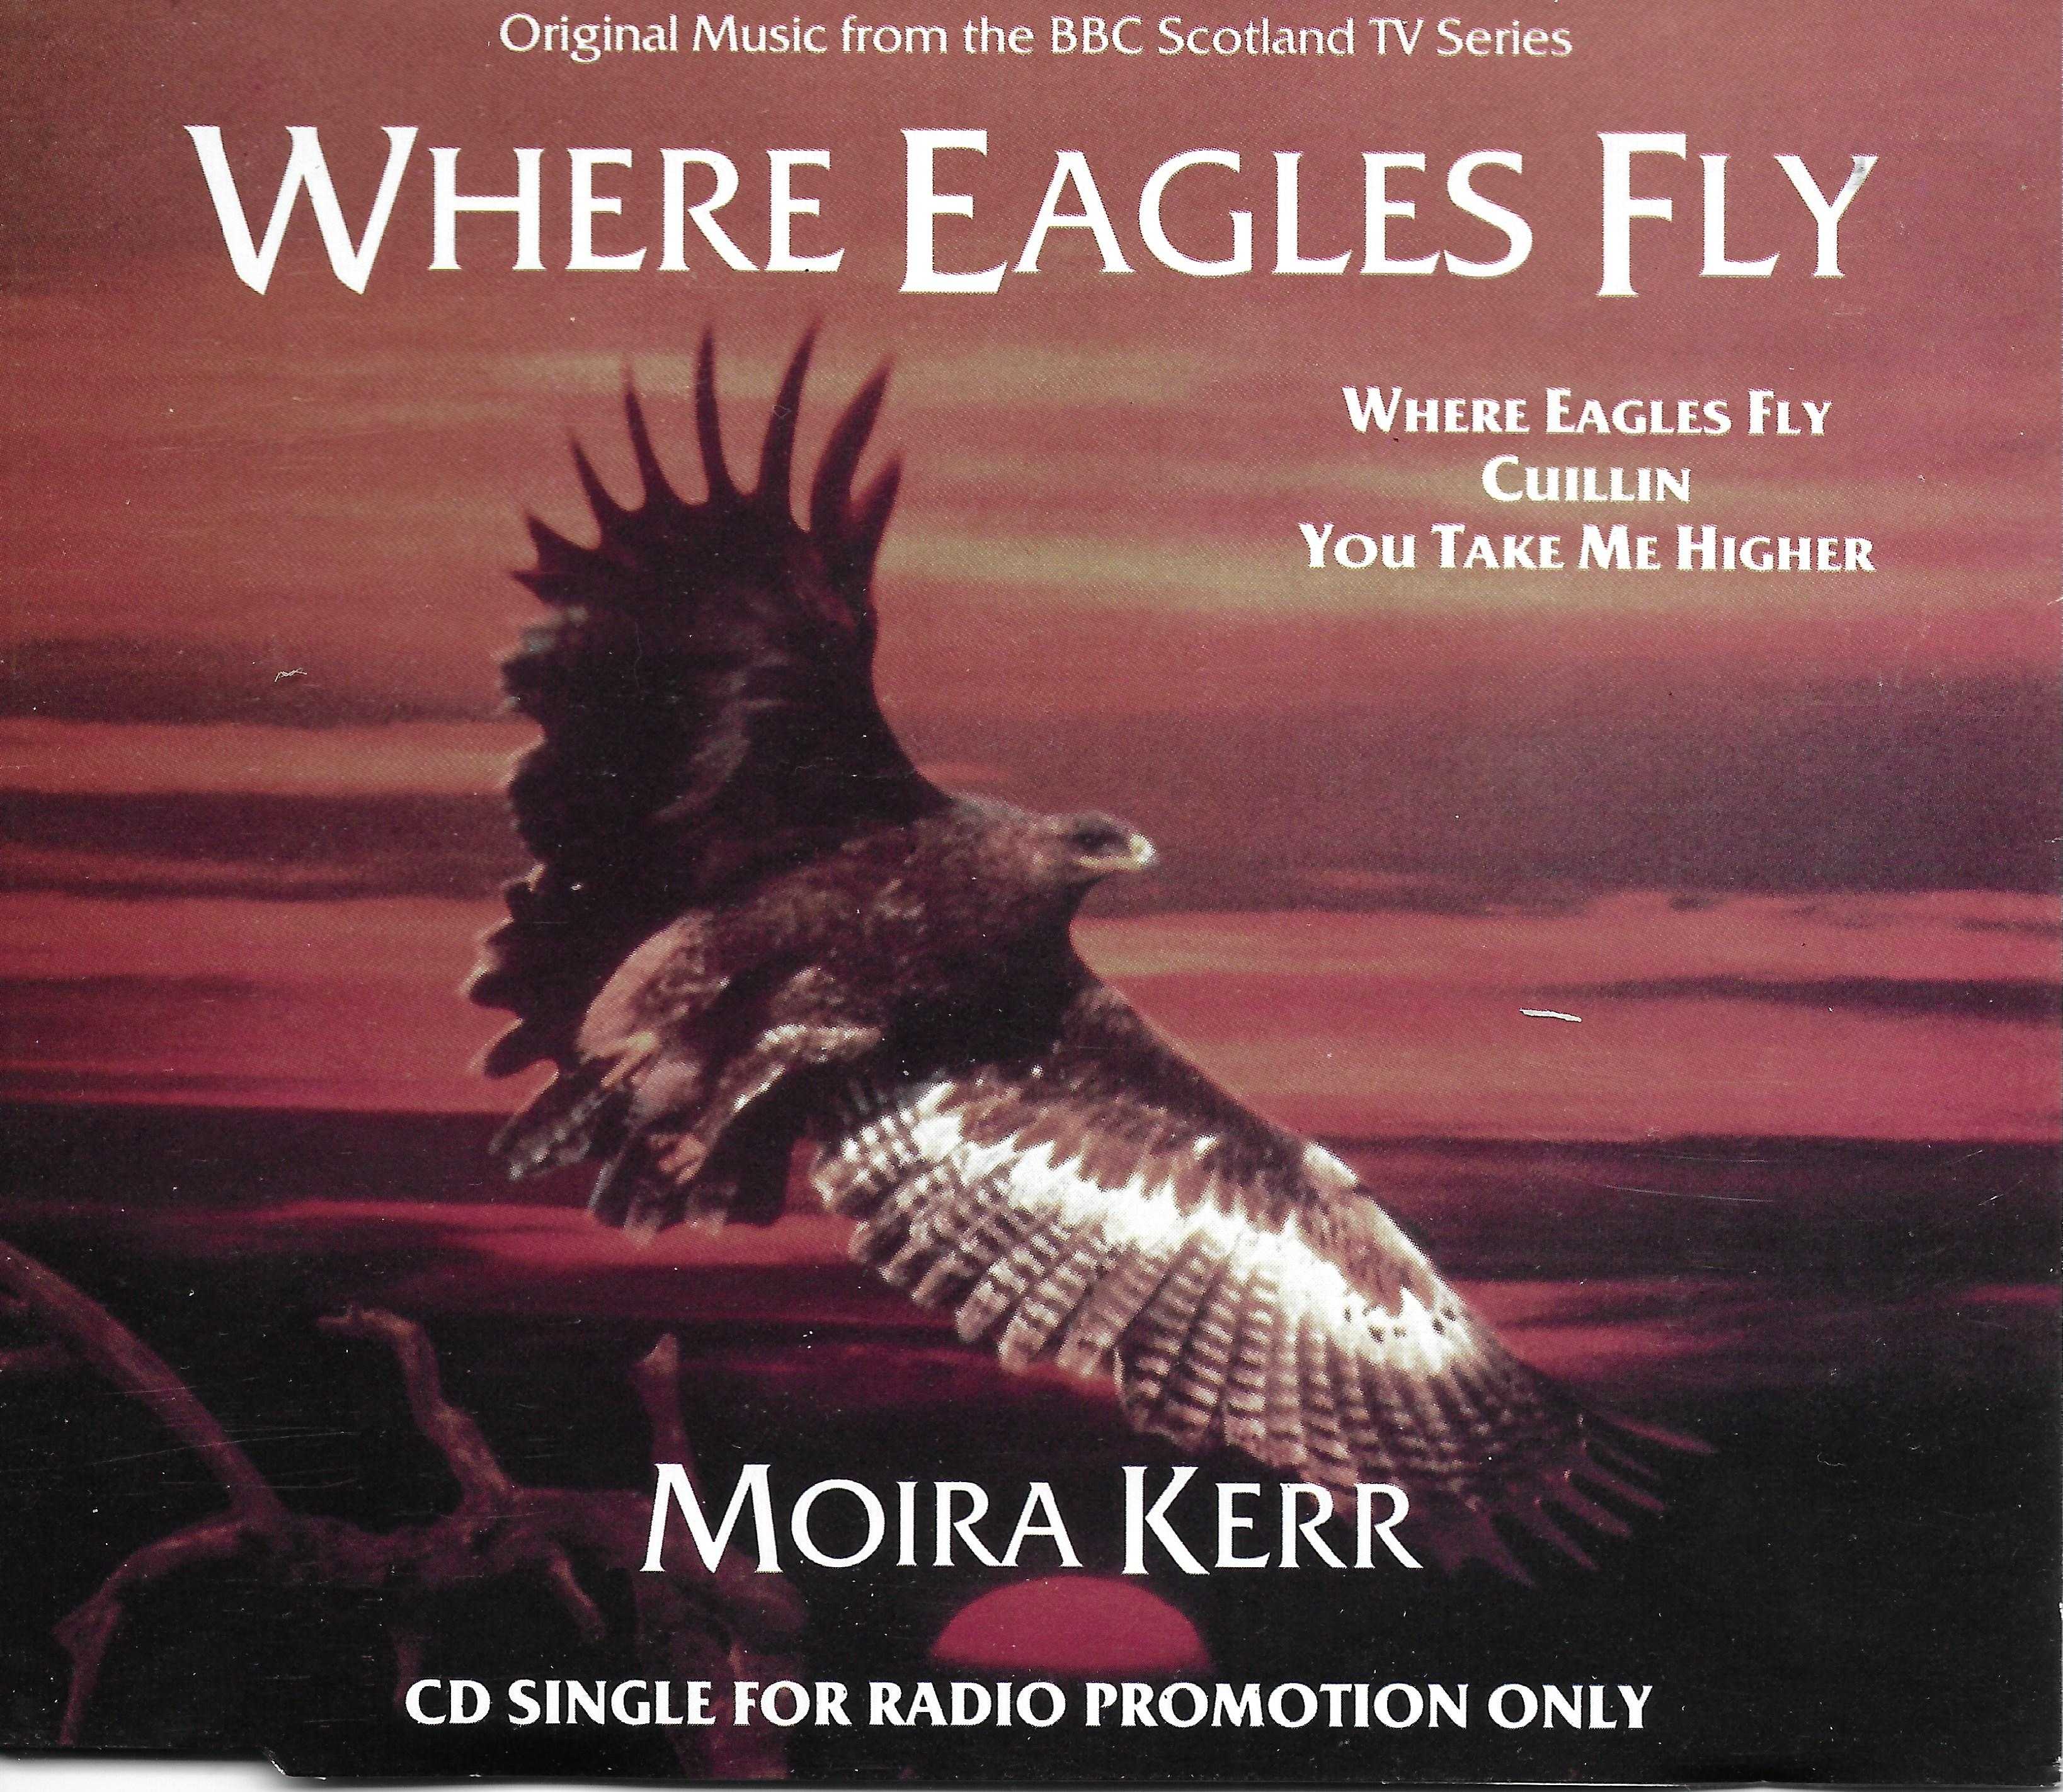 Picture of RAD CD 1 Where eagles fly - Promotional CD by artist Moira Kerr from the BBC cdsingles - Records and Tapes library